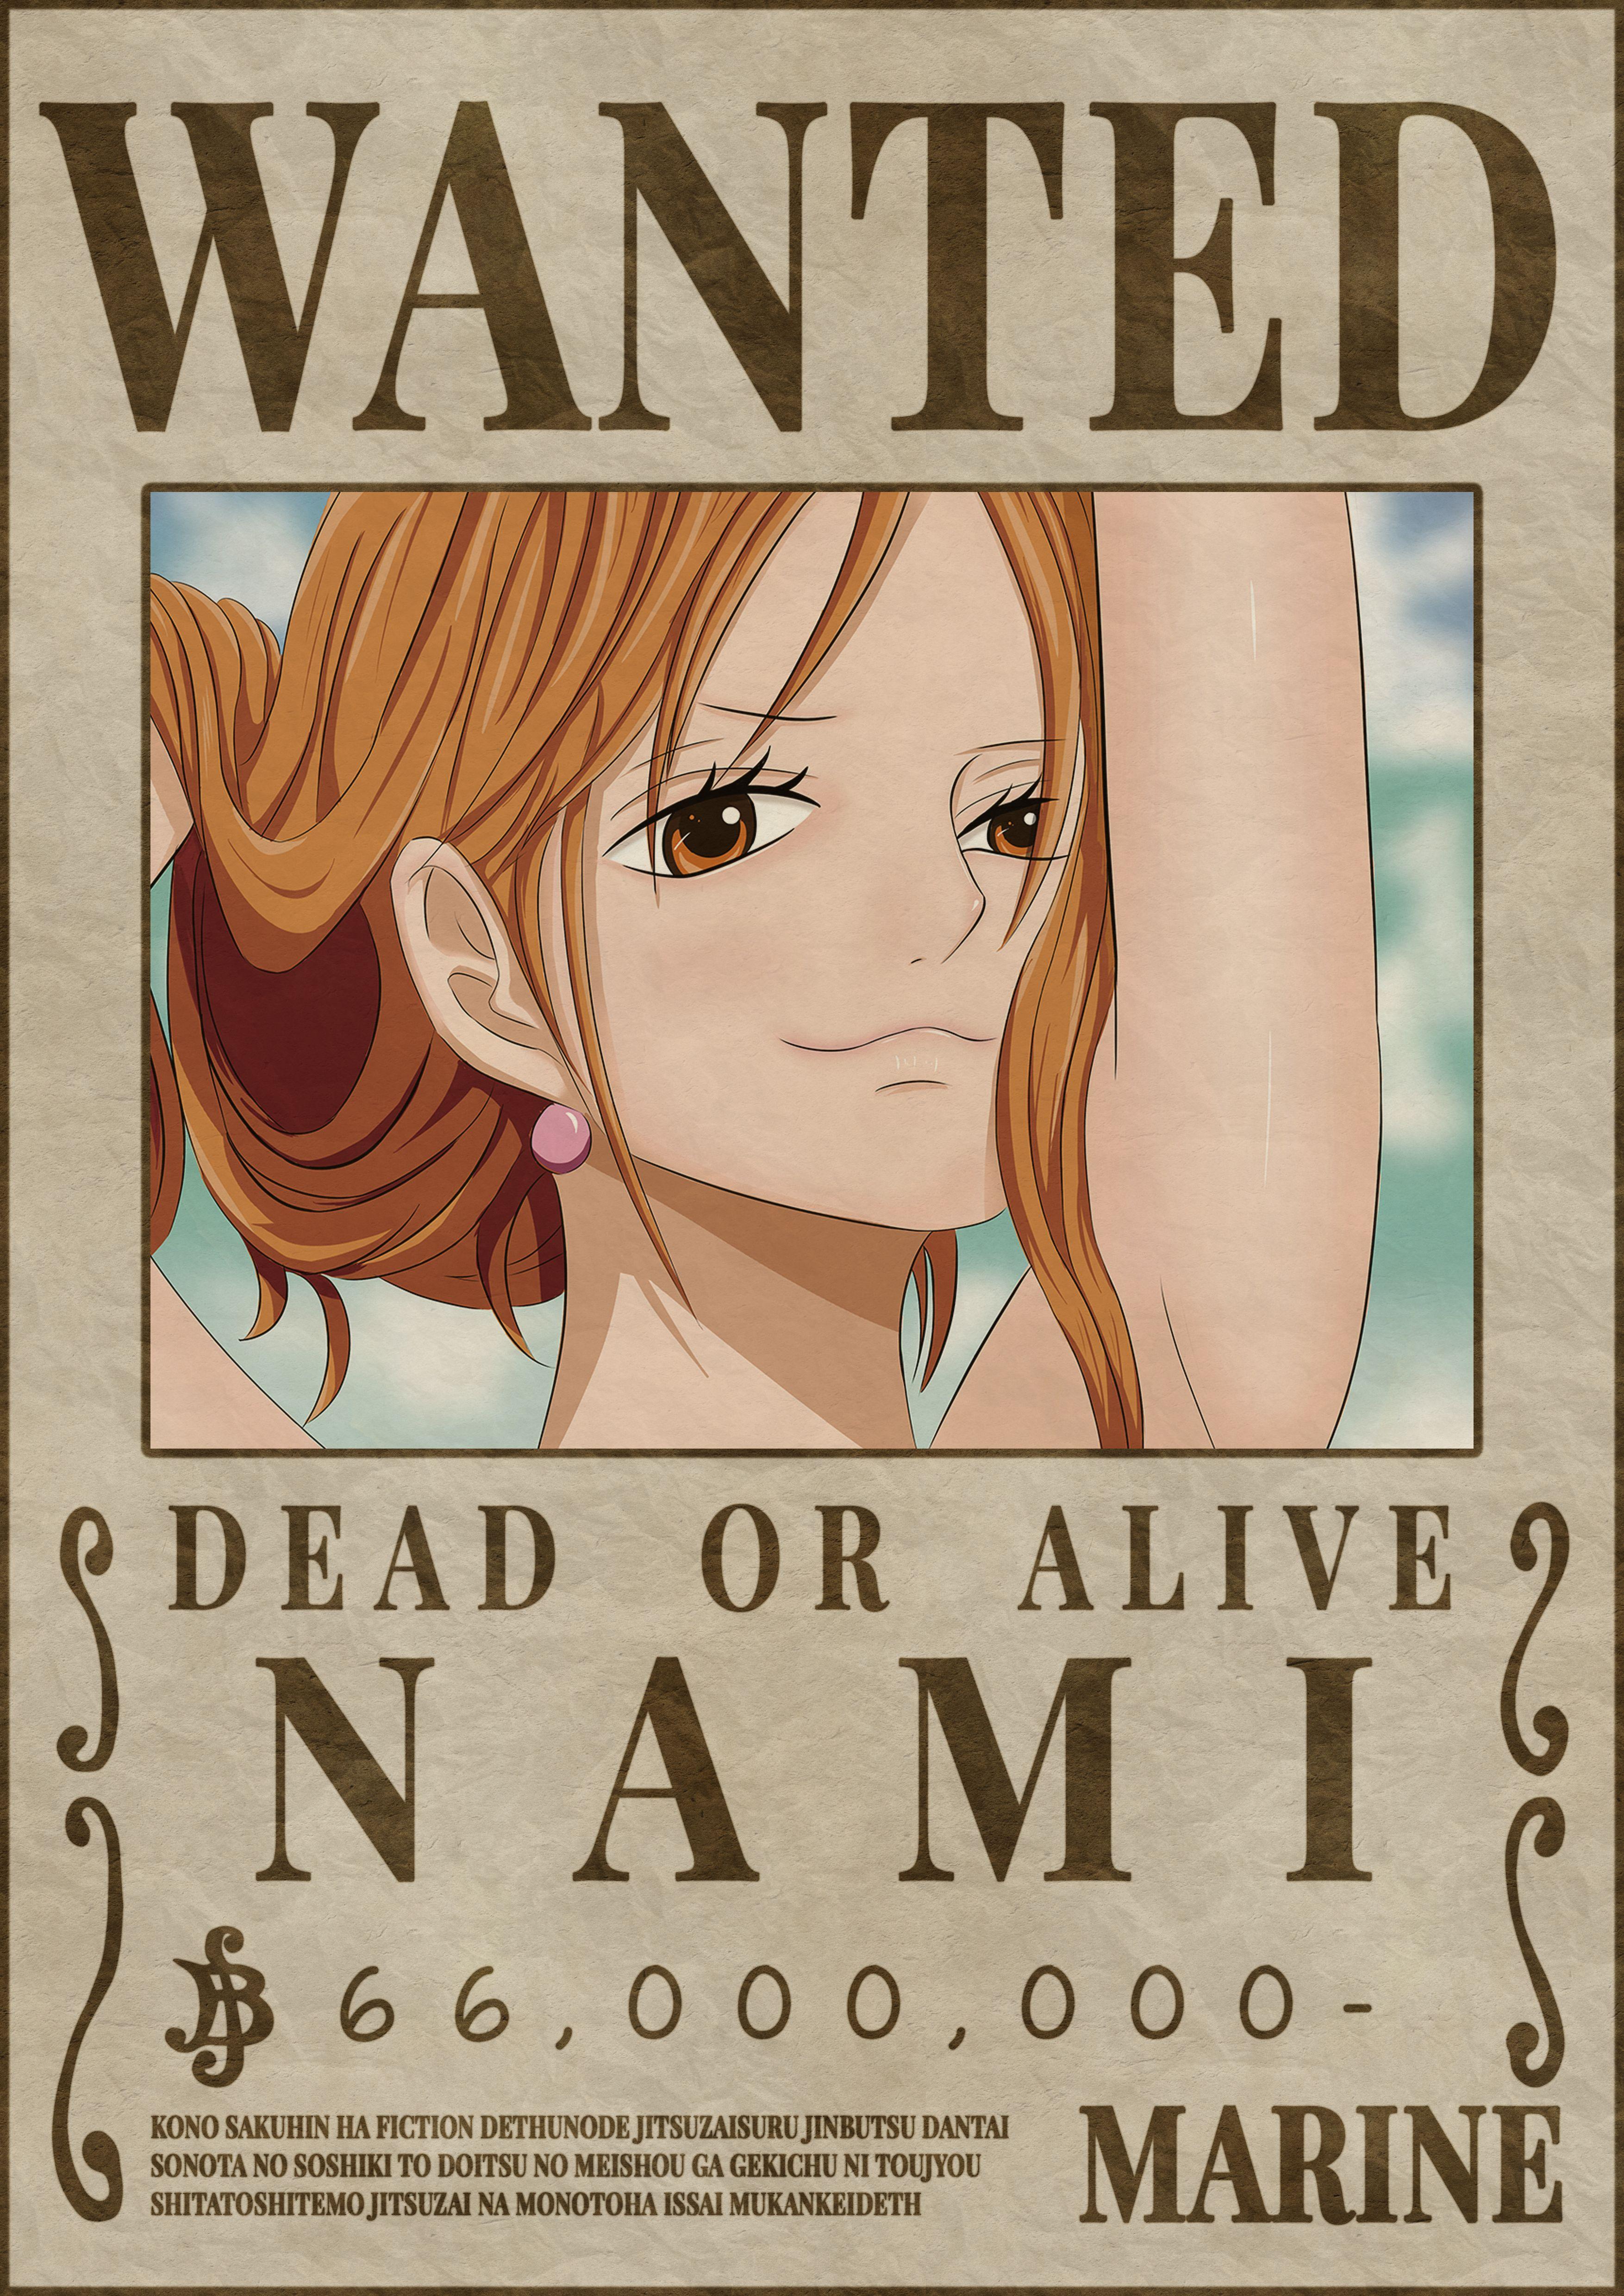 One Piece  Nami Wallpaper by NMHps3 on DeviantArt